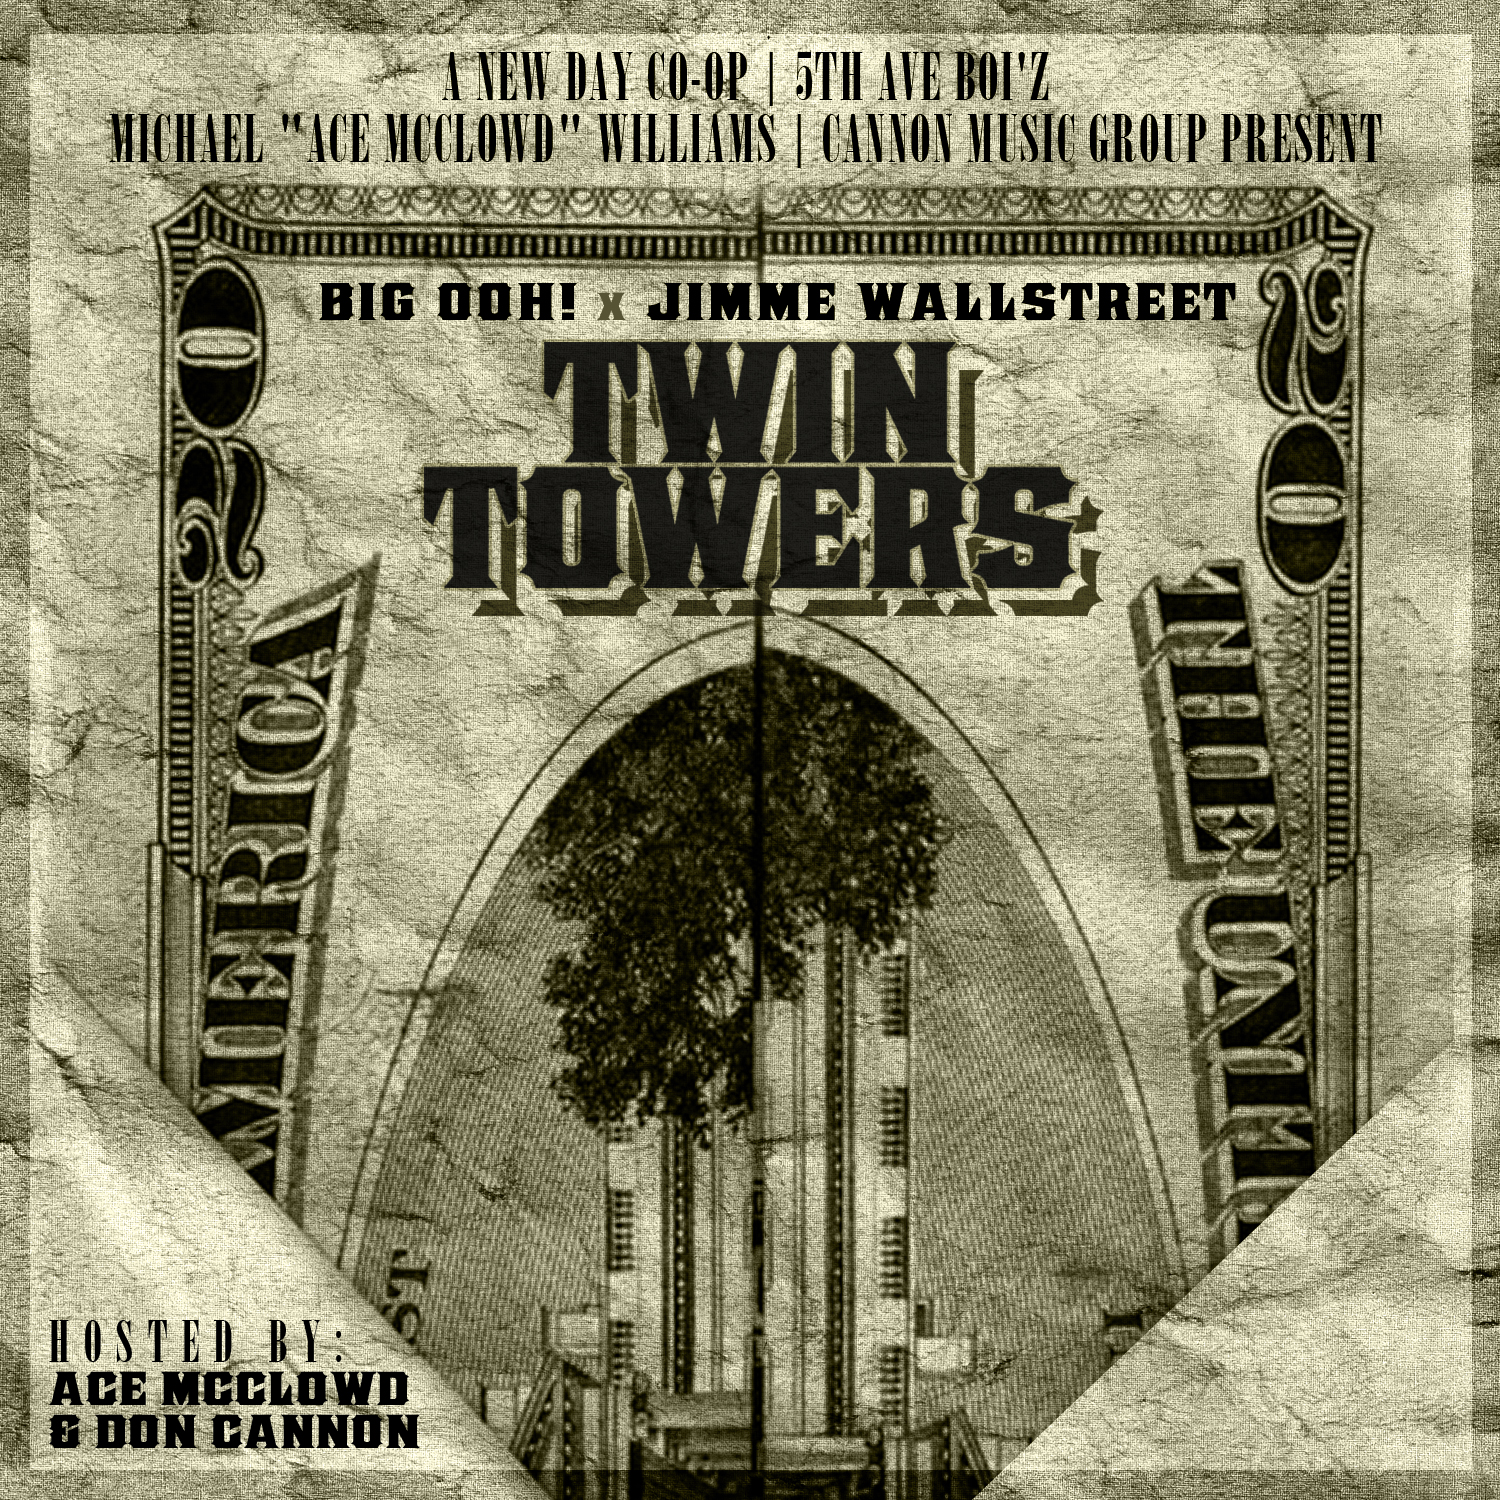 TWIN_TOWERS_frnt_cvr Big Ooh! x JiMMe Wallstreet - Twin Towers (The Mixtape) Hosted By Don Cannon & Ace McClowd  